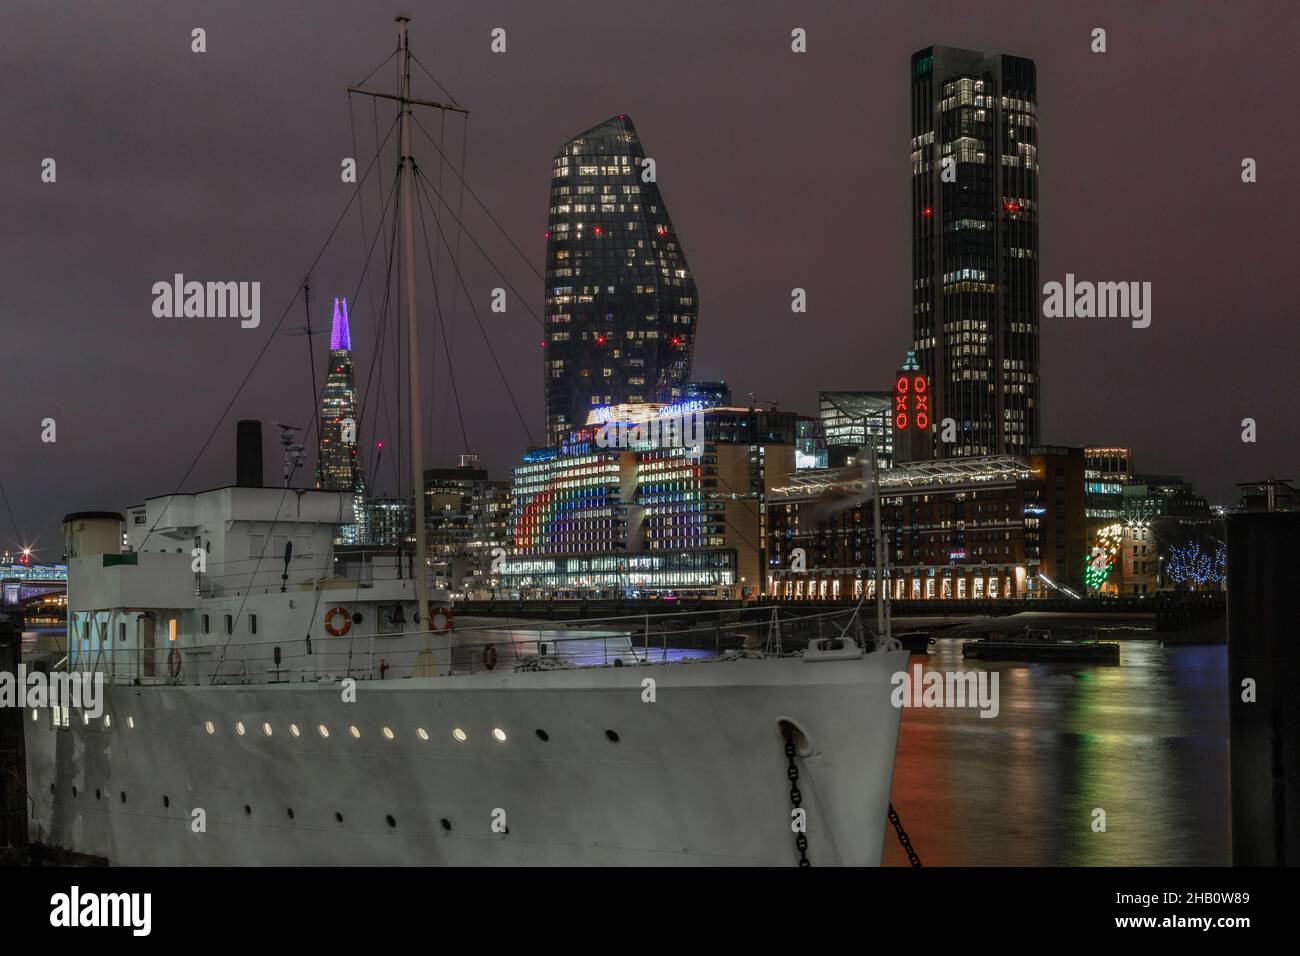 HMS Wellington on river Thames with other famous landmarks on the south bank in the background. Stock Photo